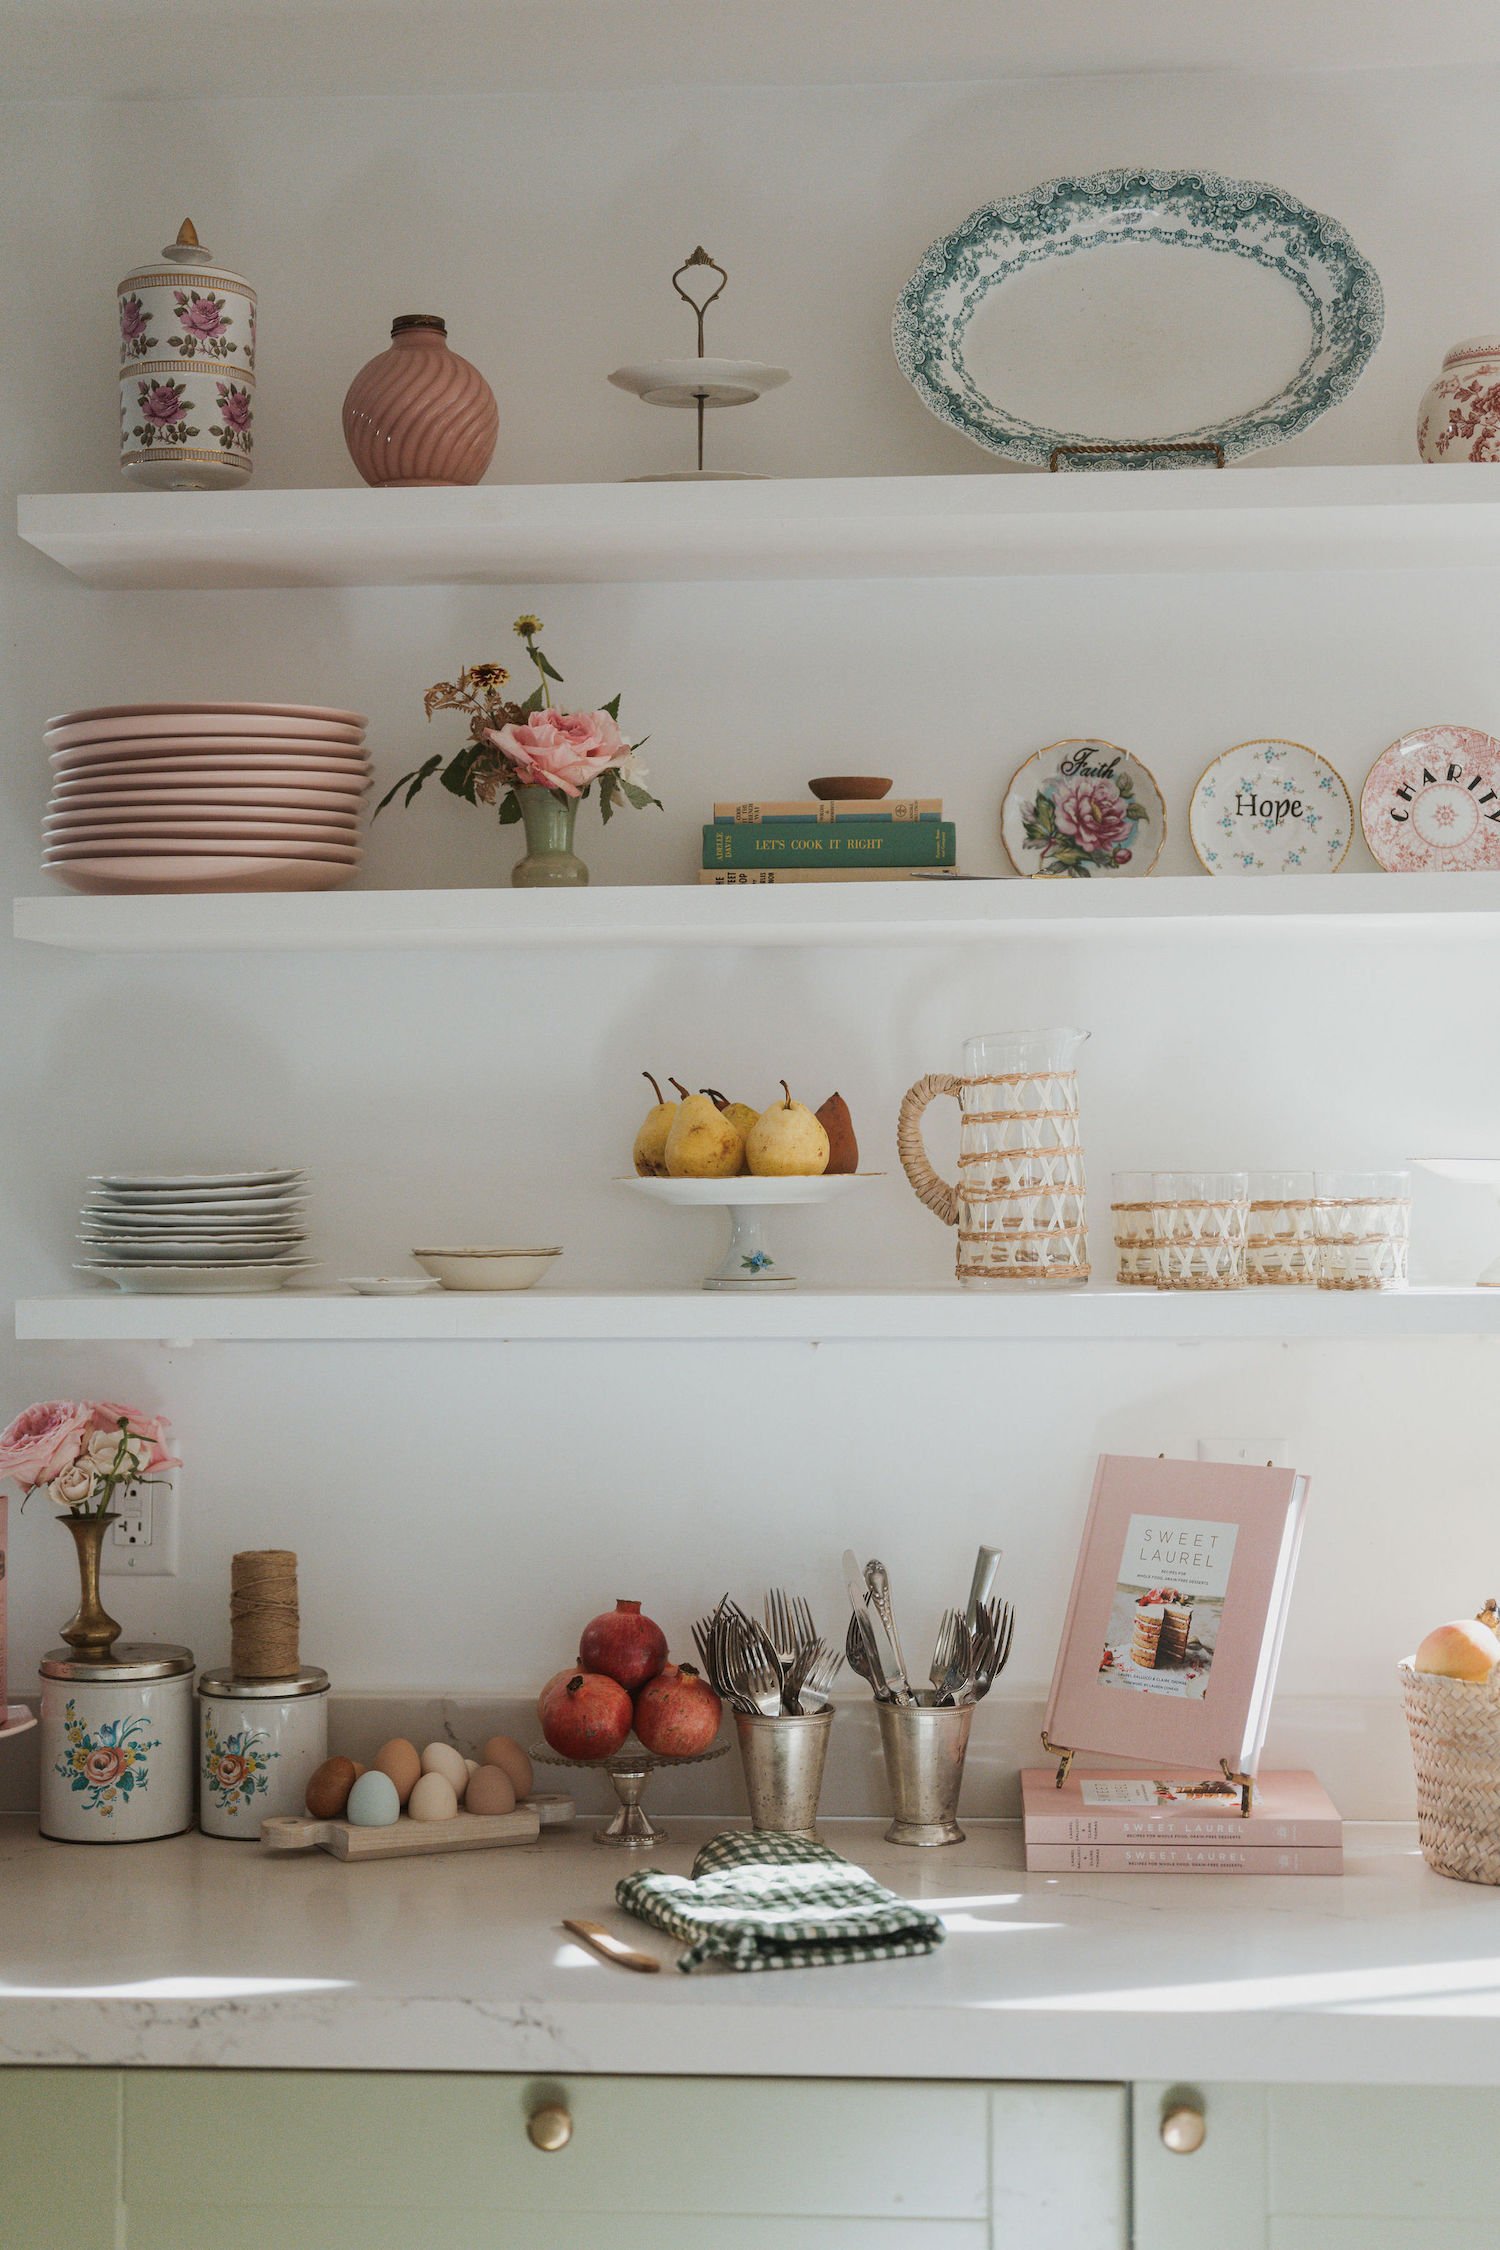 Laurel Gallucci, Sweet Laurel founder, Friendsgiving Brunch at Home in Los Angeles, open shelves in kitchen, shabby chic, pink